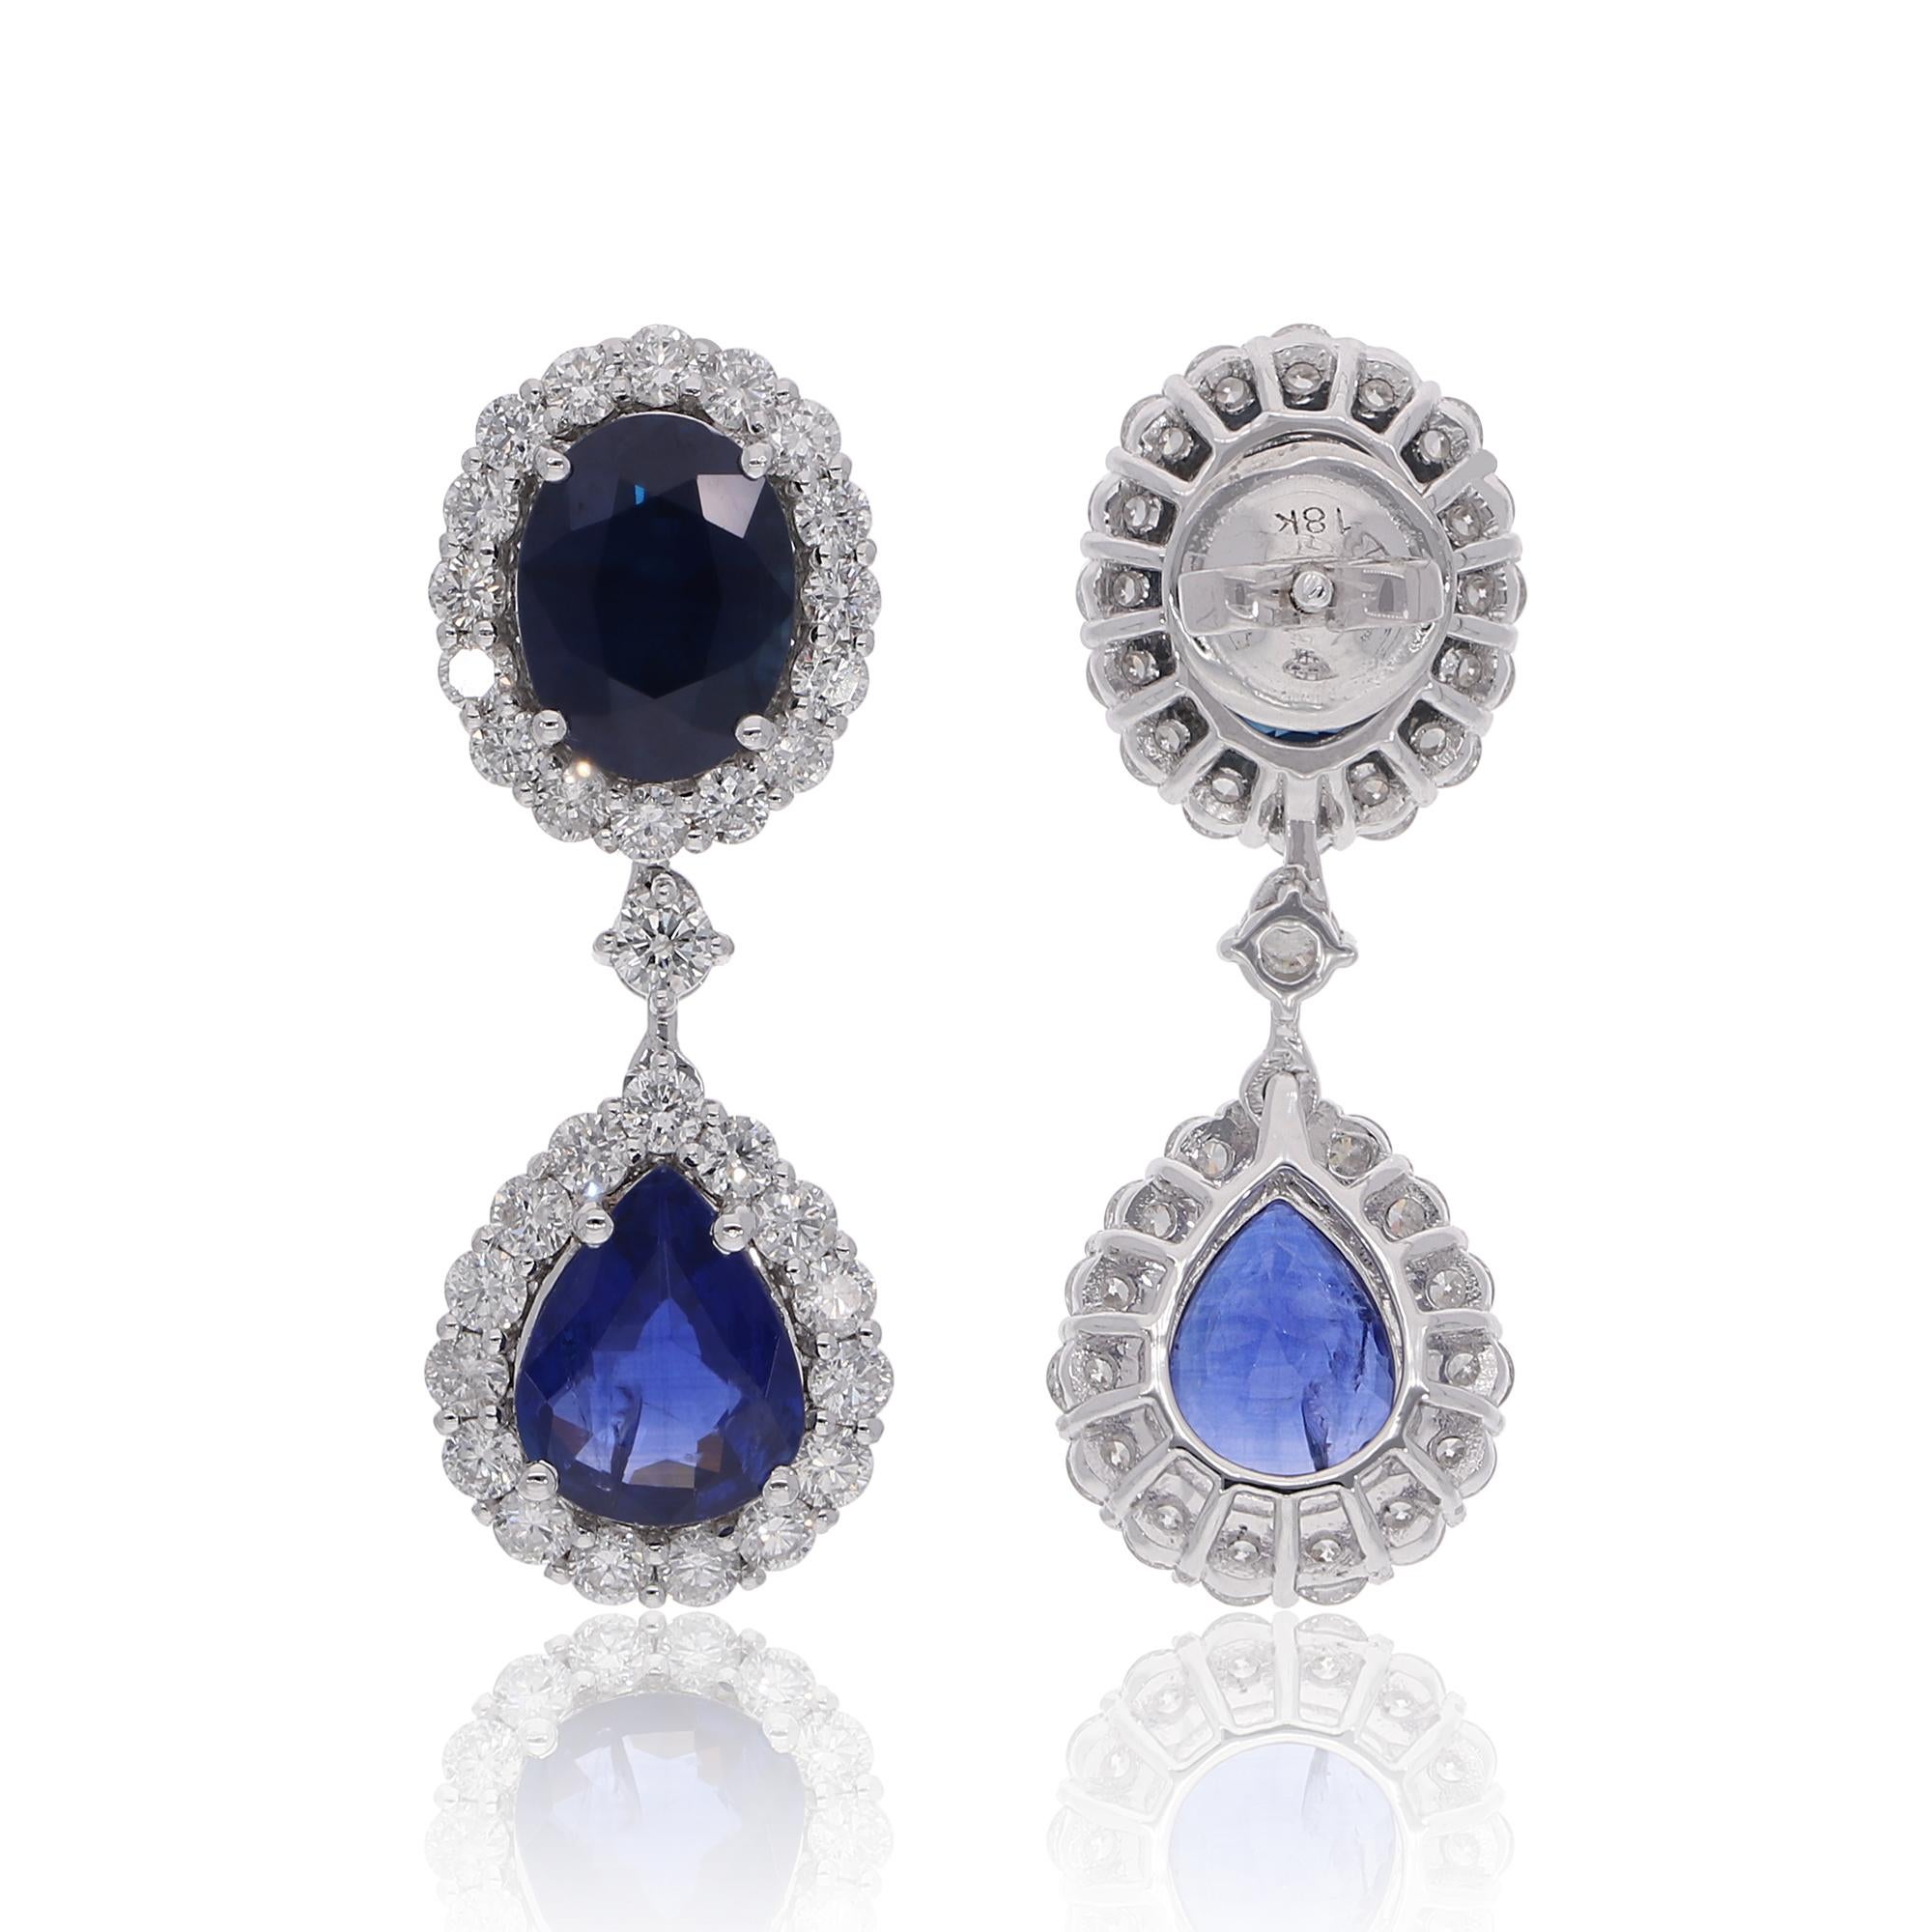 Item Code :- SEE-13099
Gross Wt. :- 8.60 gm
18k White Gold Wt. :- 6.74 gm
Diamond Wt. :- 2.15 Ct. ( AVERAGE DIAMOND CLARITY SI1-SI2 & COLOR H-I )
Blue Sapphire Wt. :- 7.13 Ct.
Earrings Length :- 31 mm approx.

✦ Sizing
.....................
We can